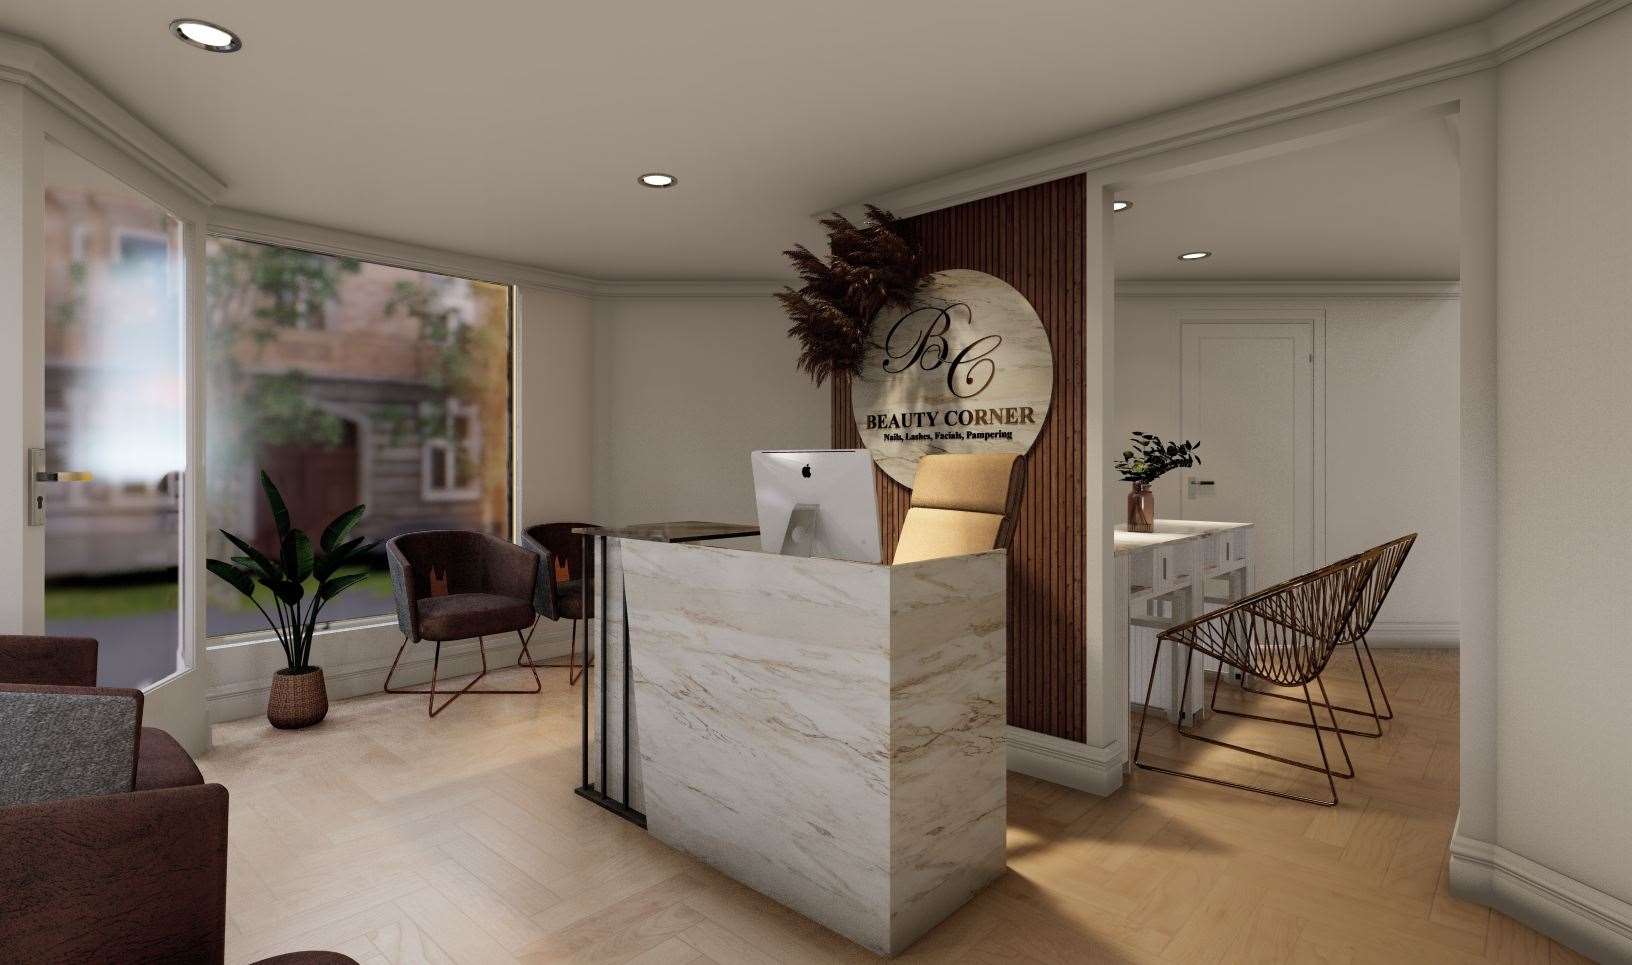 The ground floor of the proposed salon would host a reception and waiting area. Picture: ABC planning portal